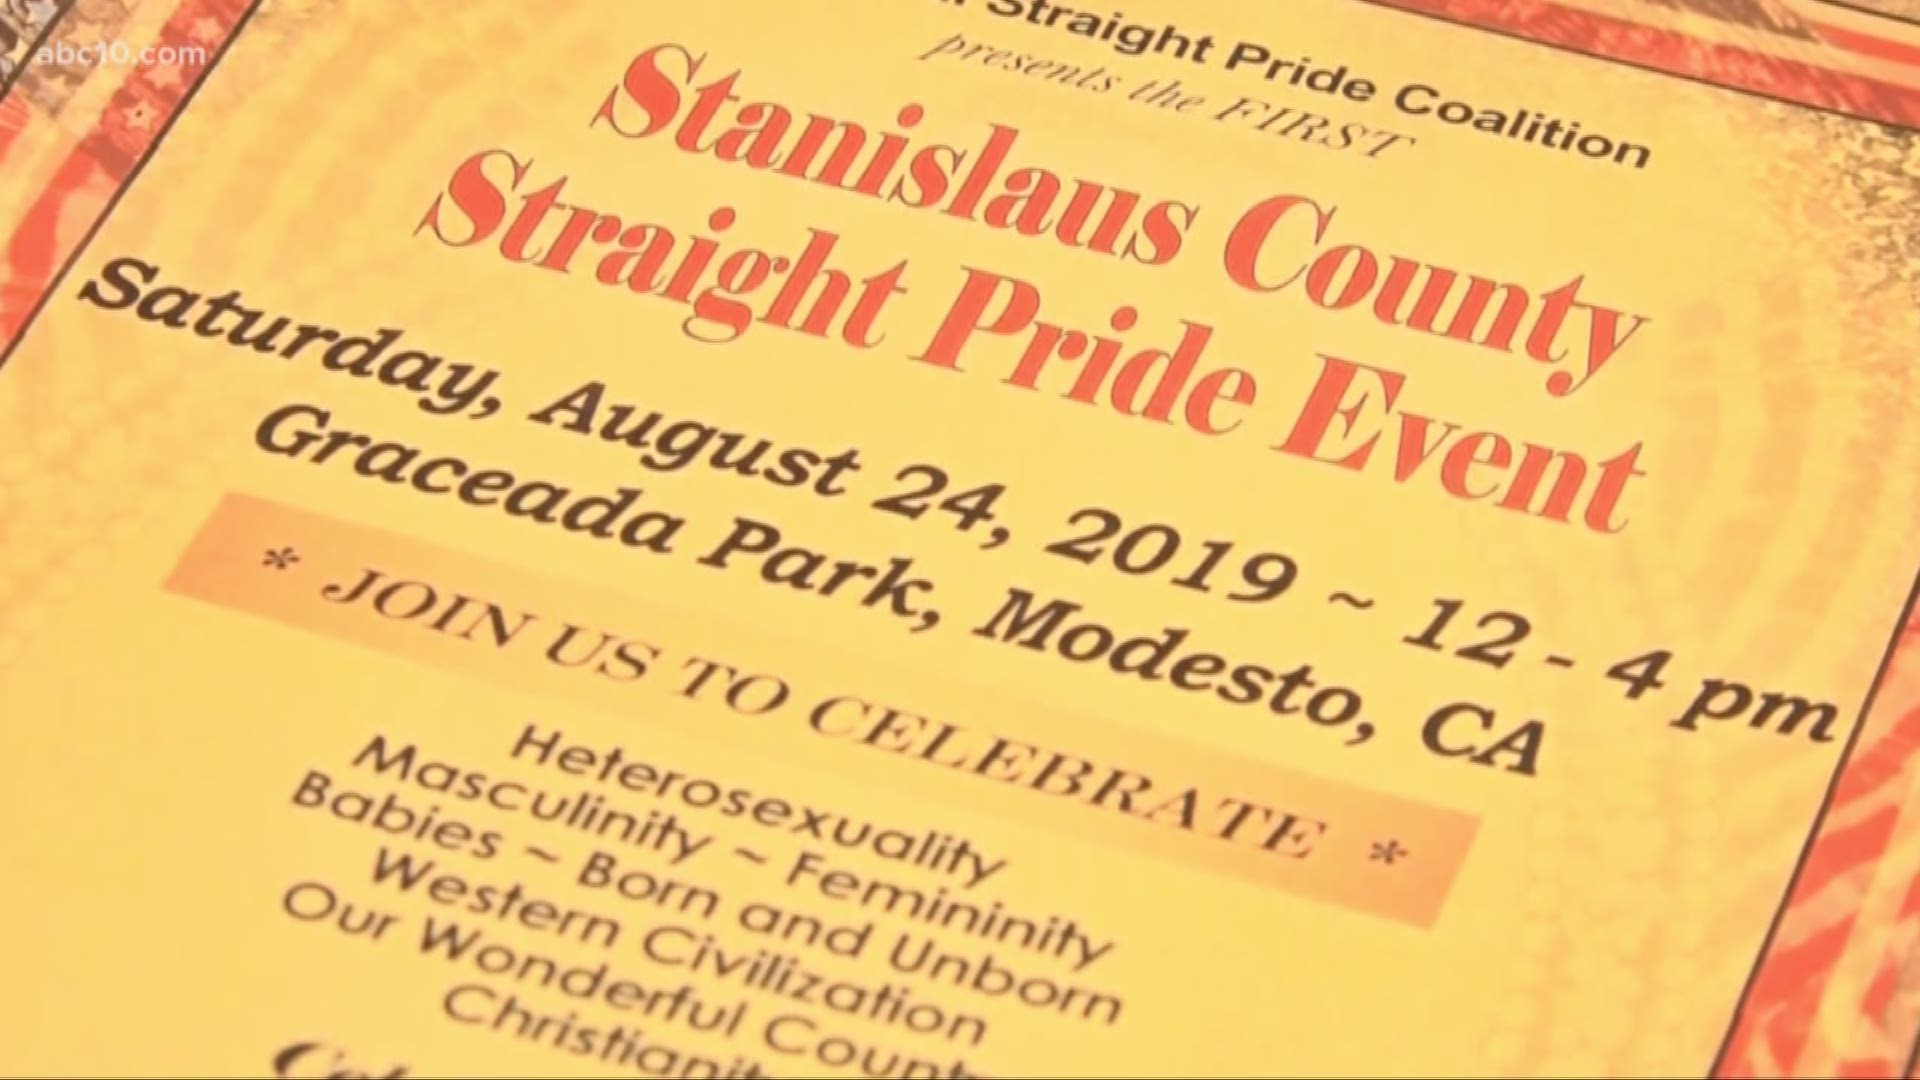 A speaker series and a "parade" are currently planned for the National Straight Pride Coalitions event in Modesto. Organizers say all the details will be released on August 24.